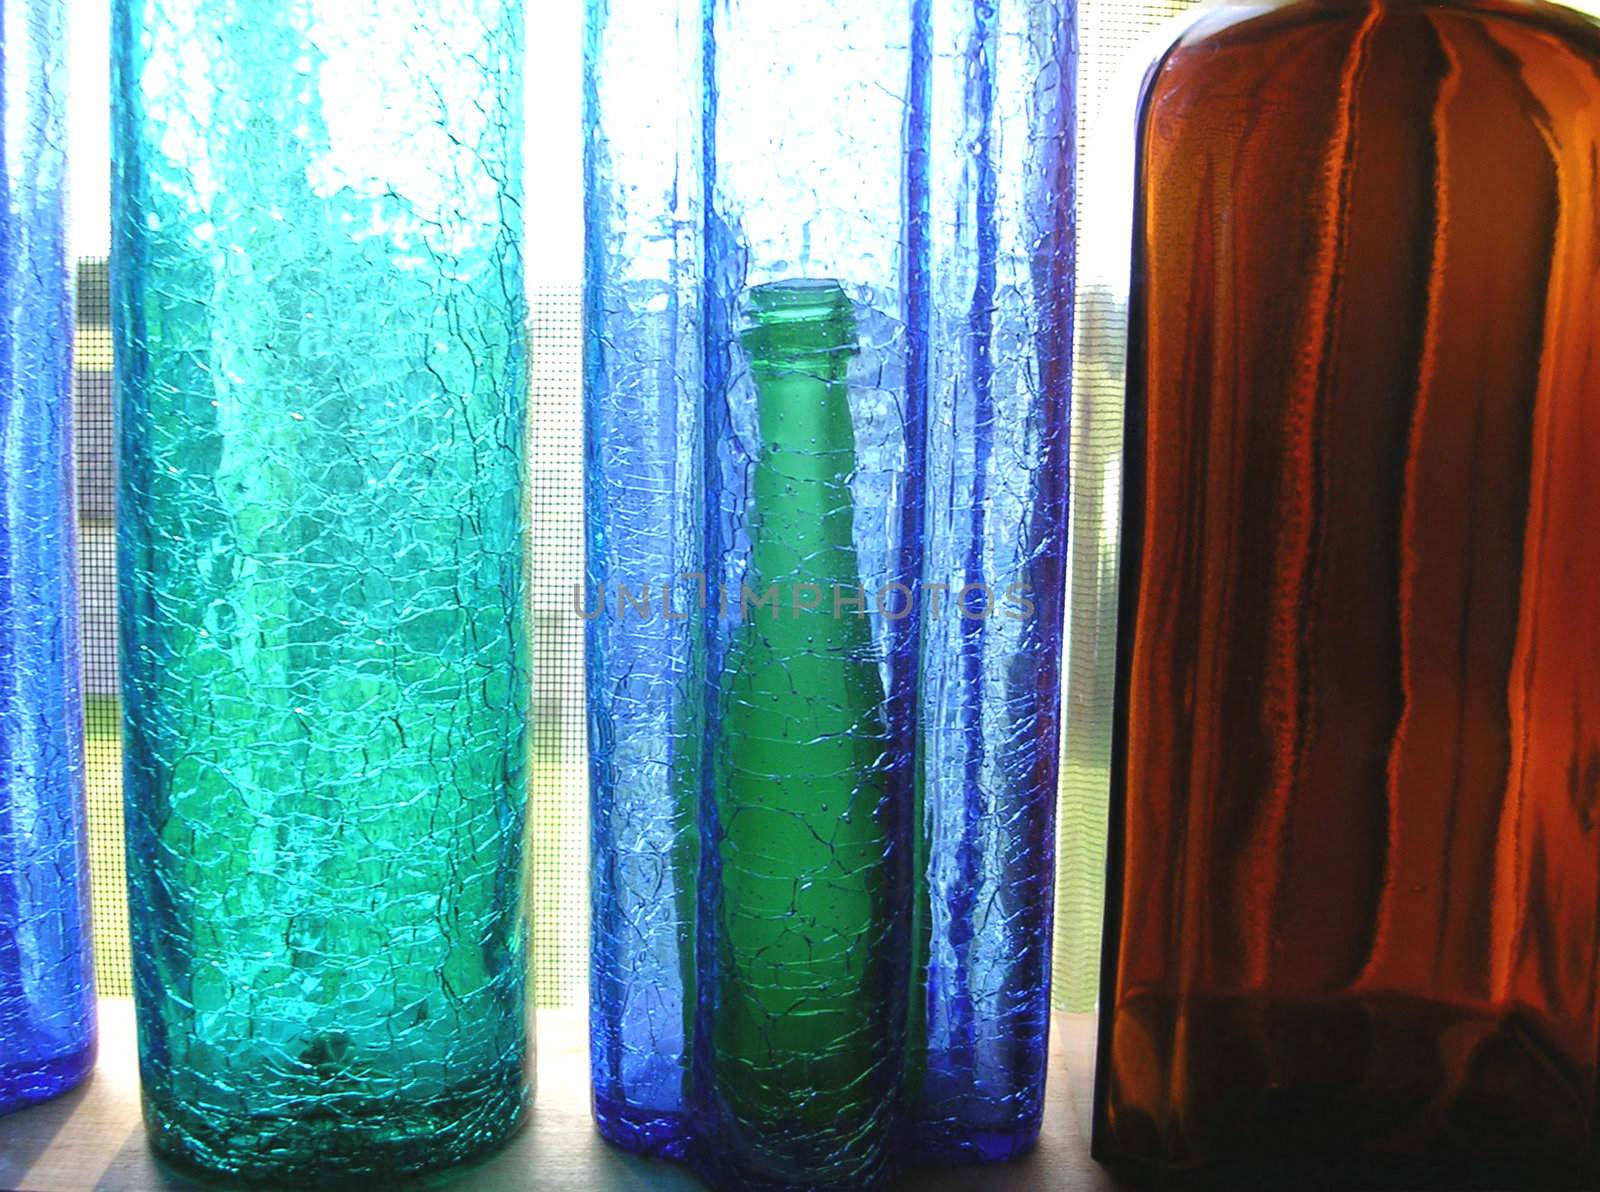 Still Life with Bottles by Karolus